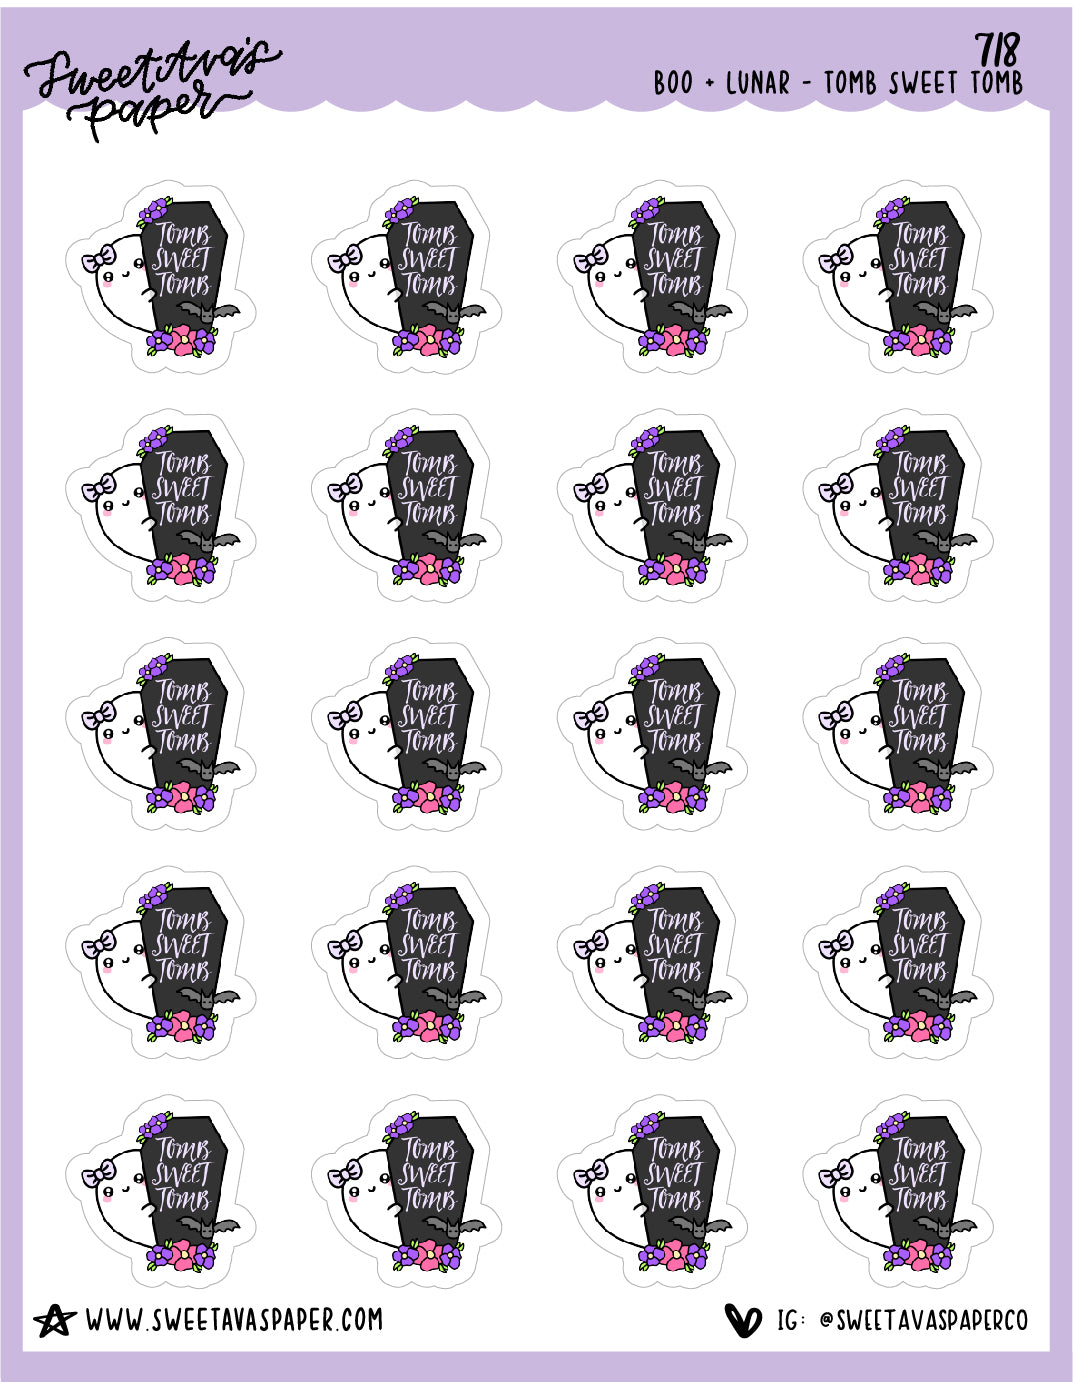 Tomb Sweet Tomb Planner Stickers - Boo and Lunar [718]